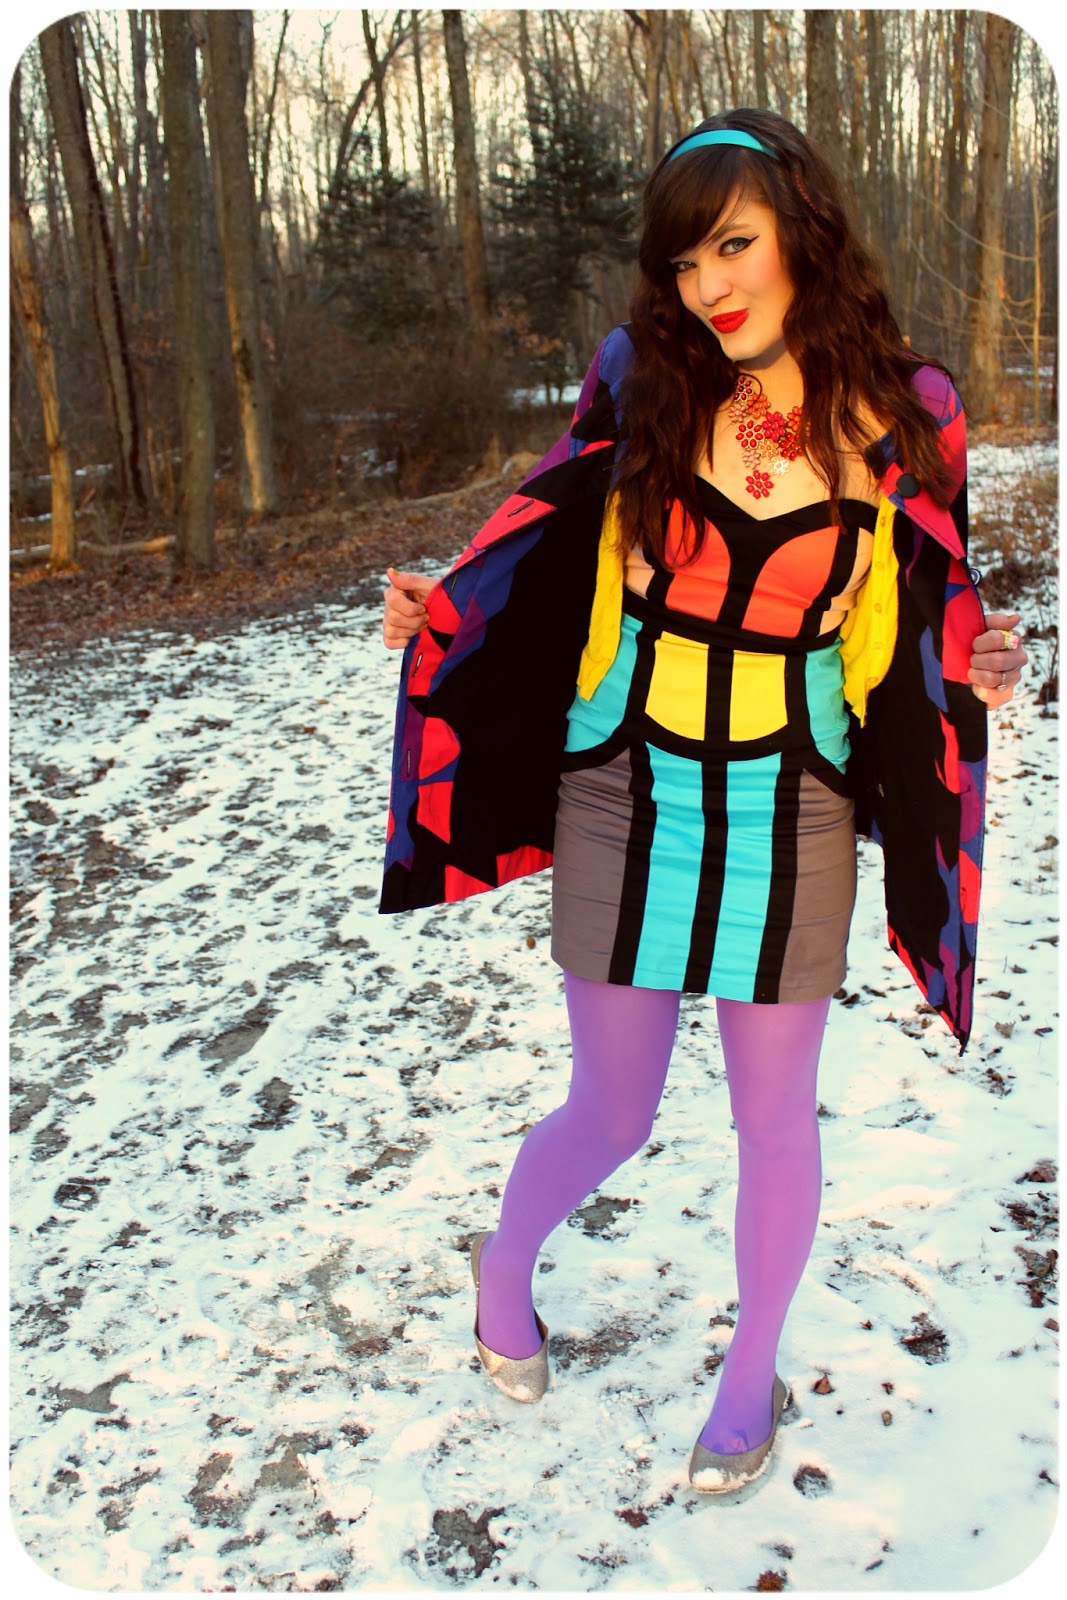 Butterflies On Mars: Mondrian meets colorful colorblock style!